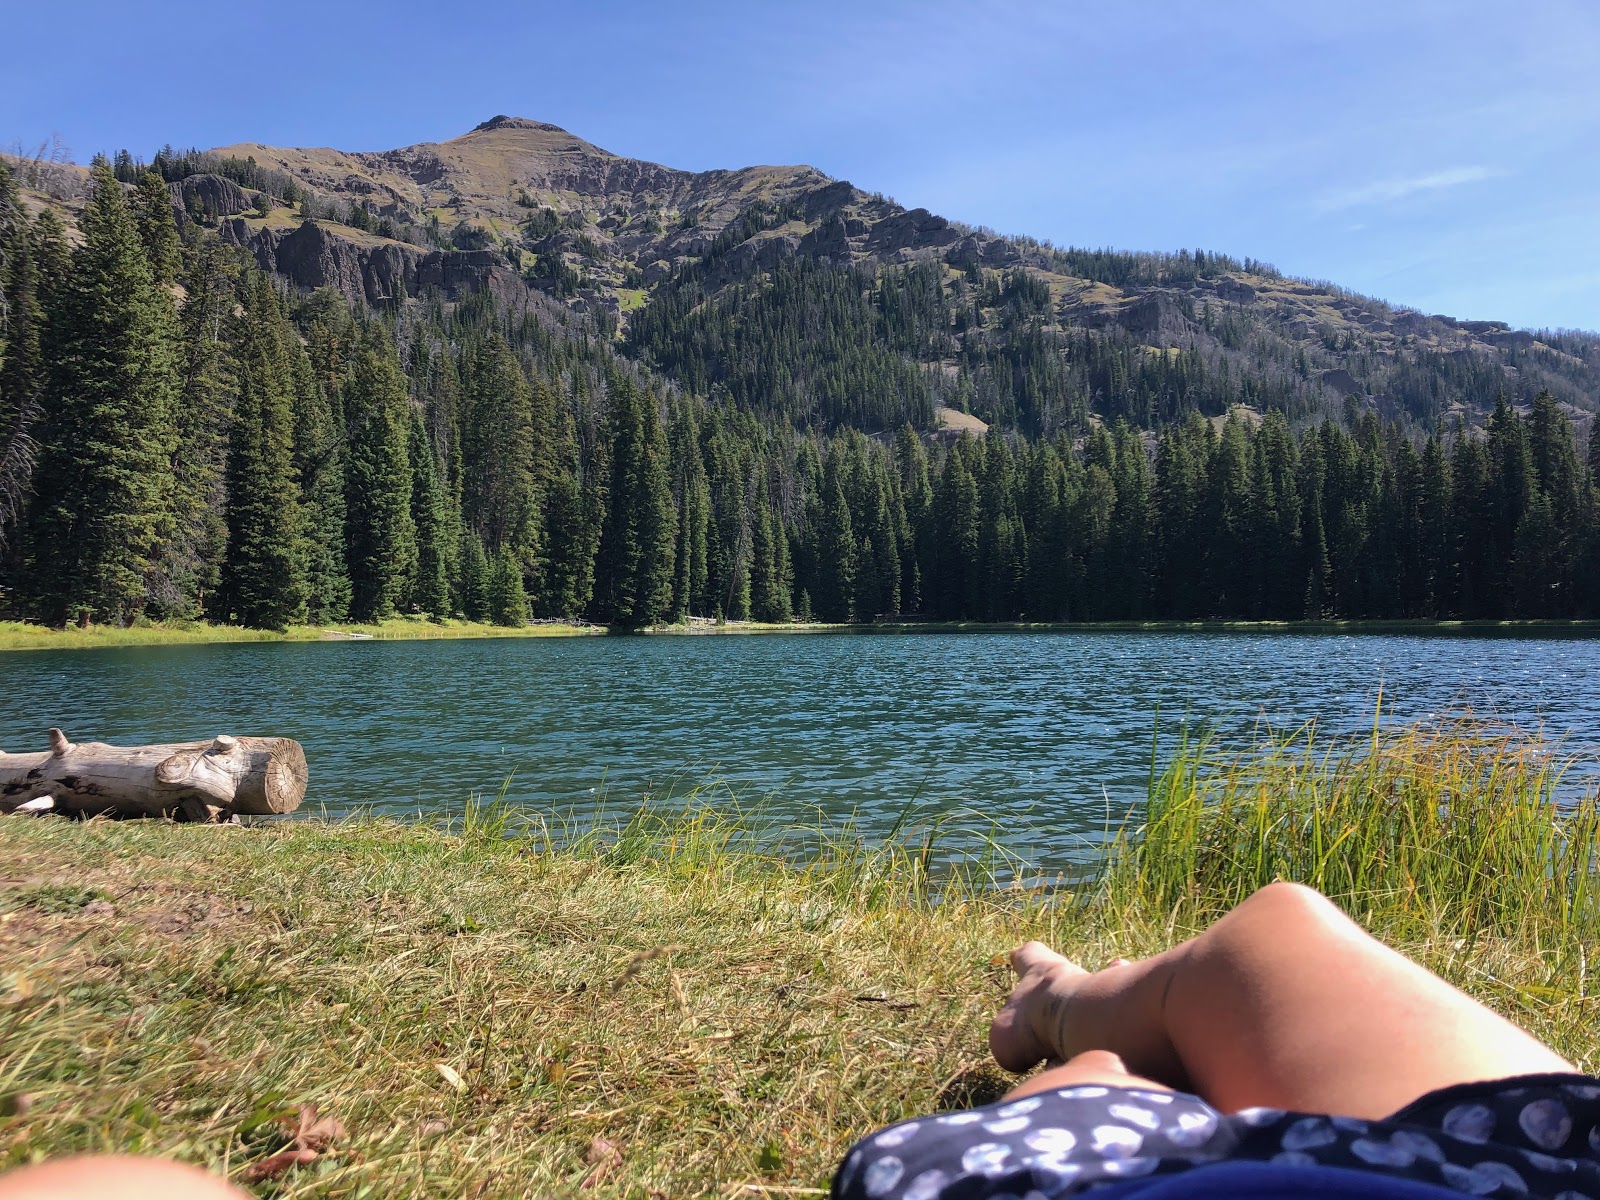 A backpacking confession: An alpine lake with Maggie's tired hiking feet in the shot.